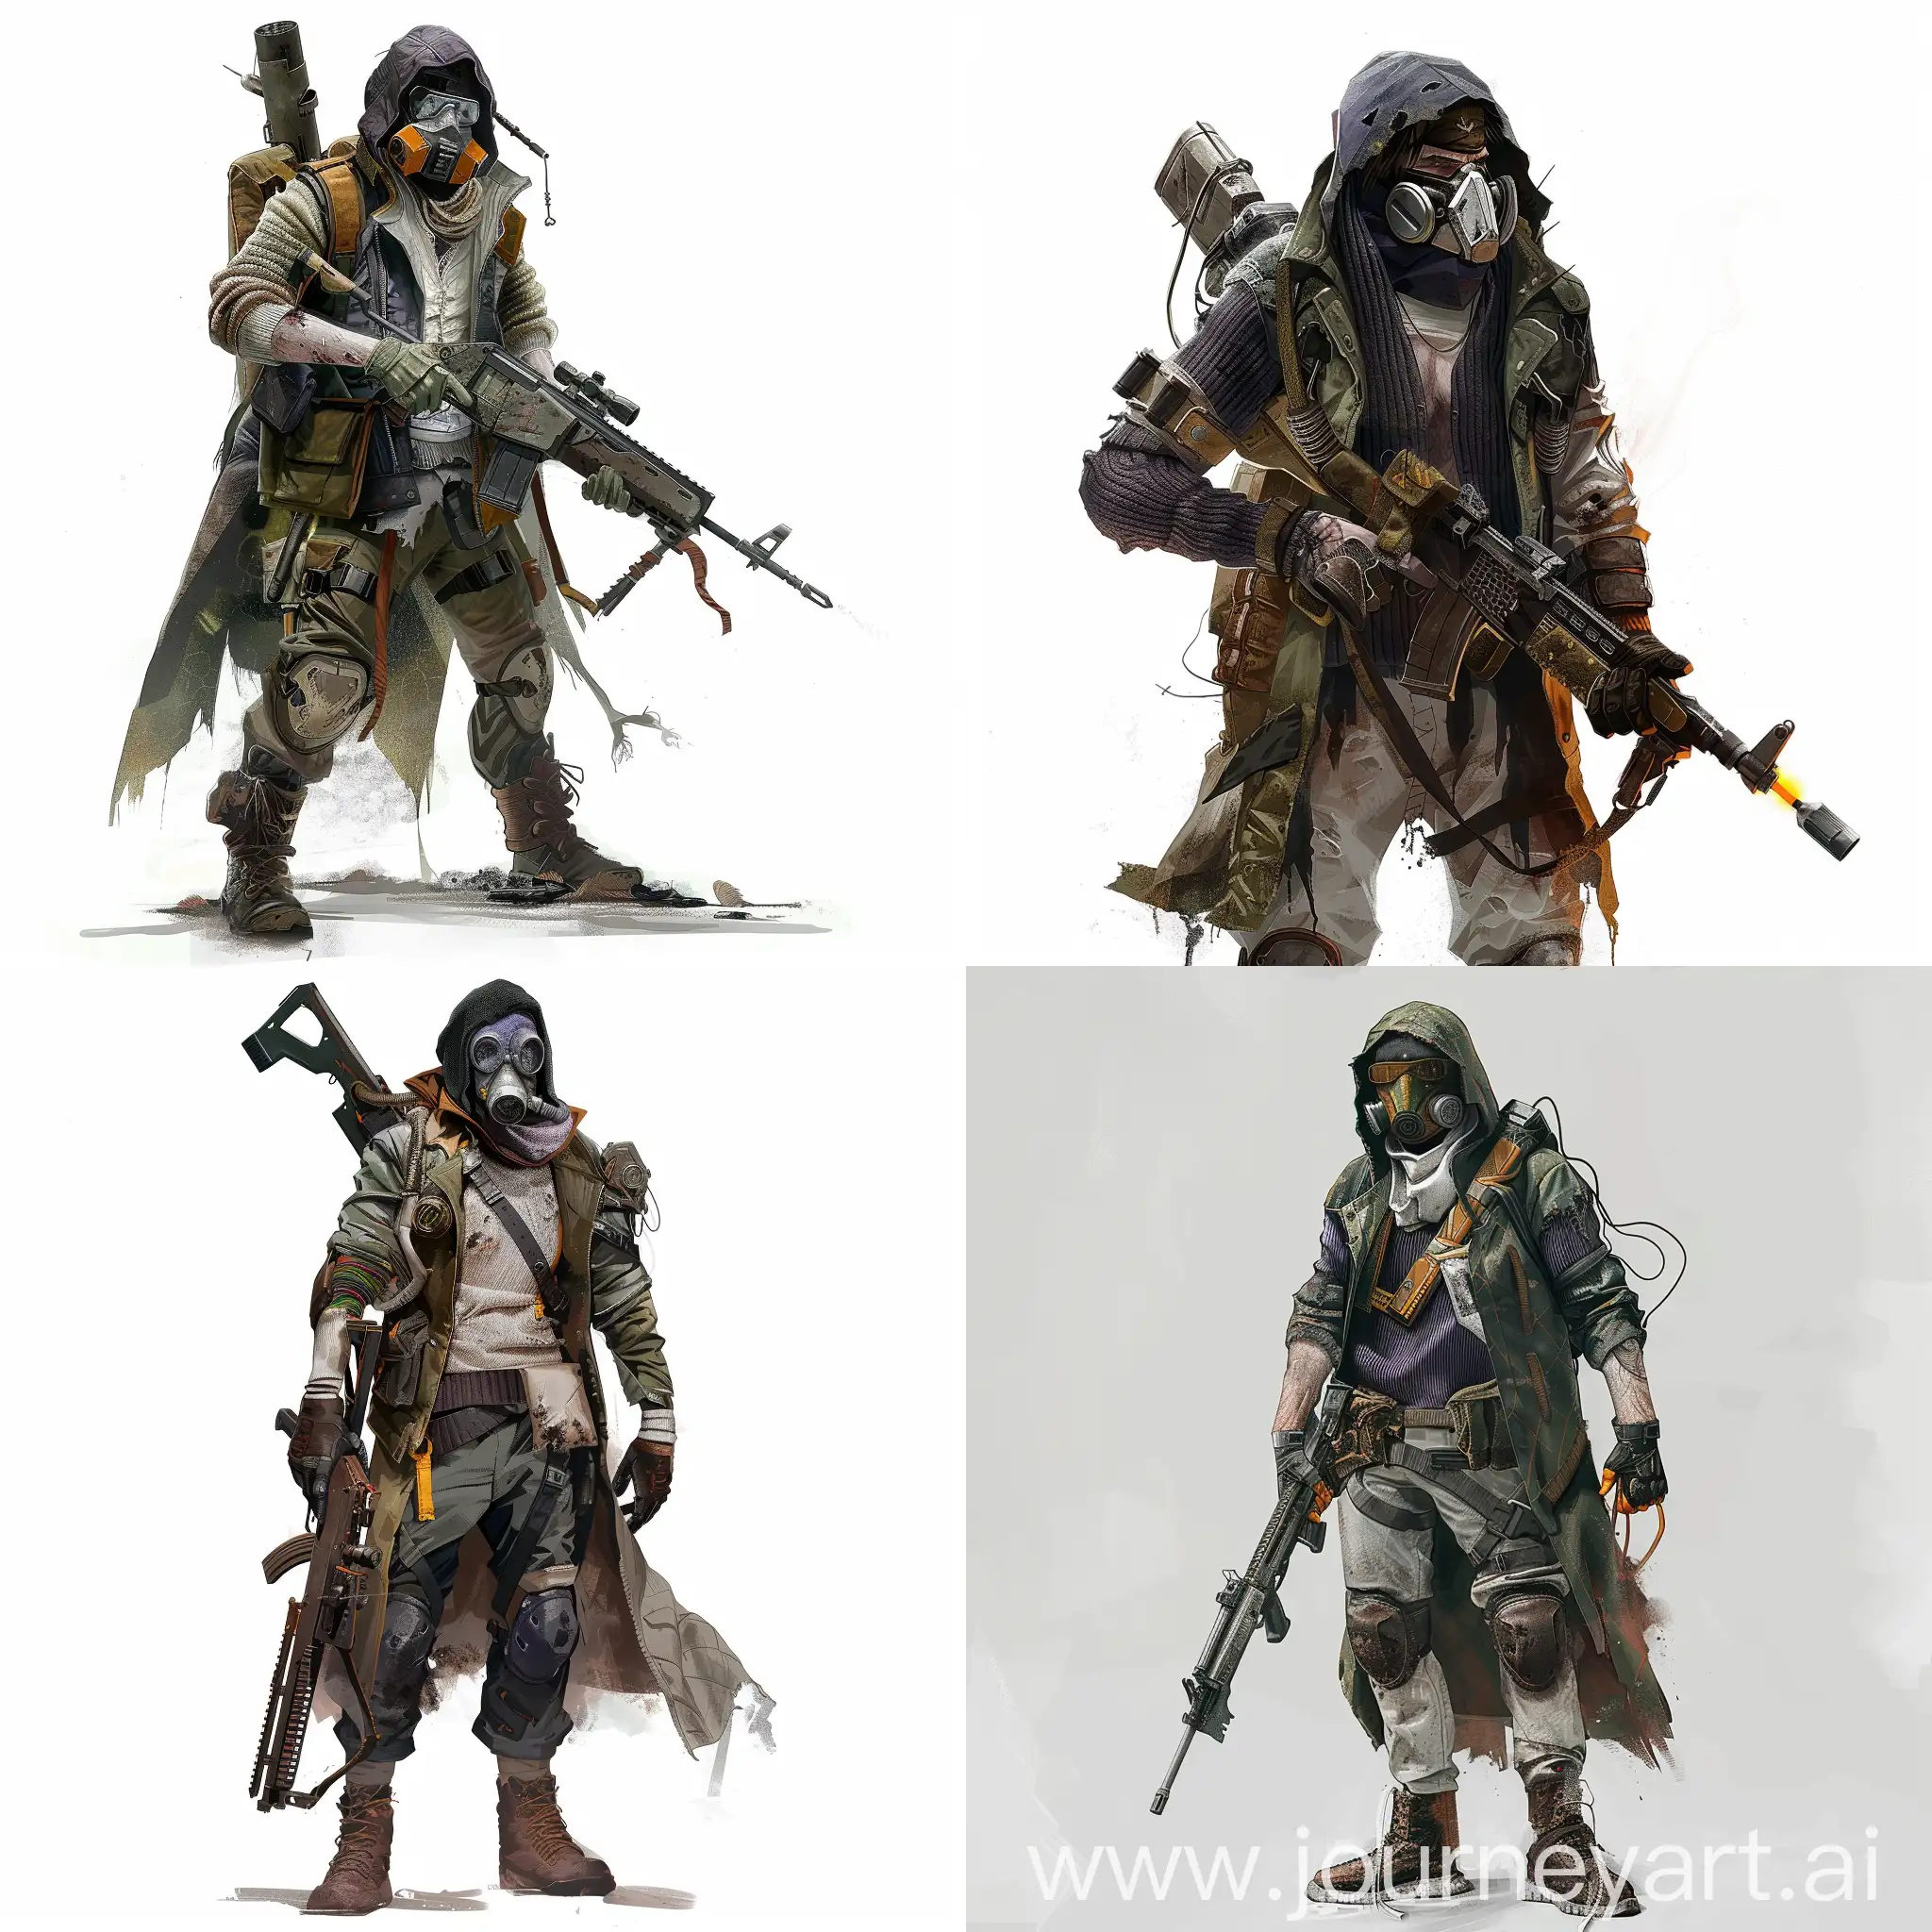 Stalker-Survivor-from-Metro-2033-Universe-with-Sniper-Rifle